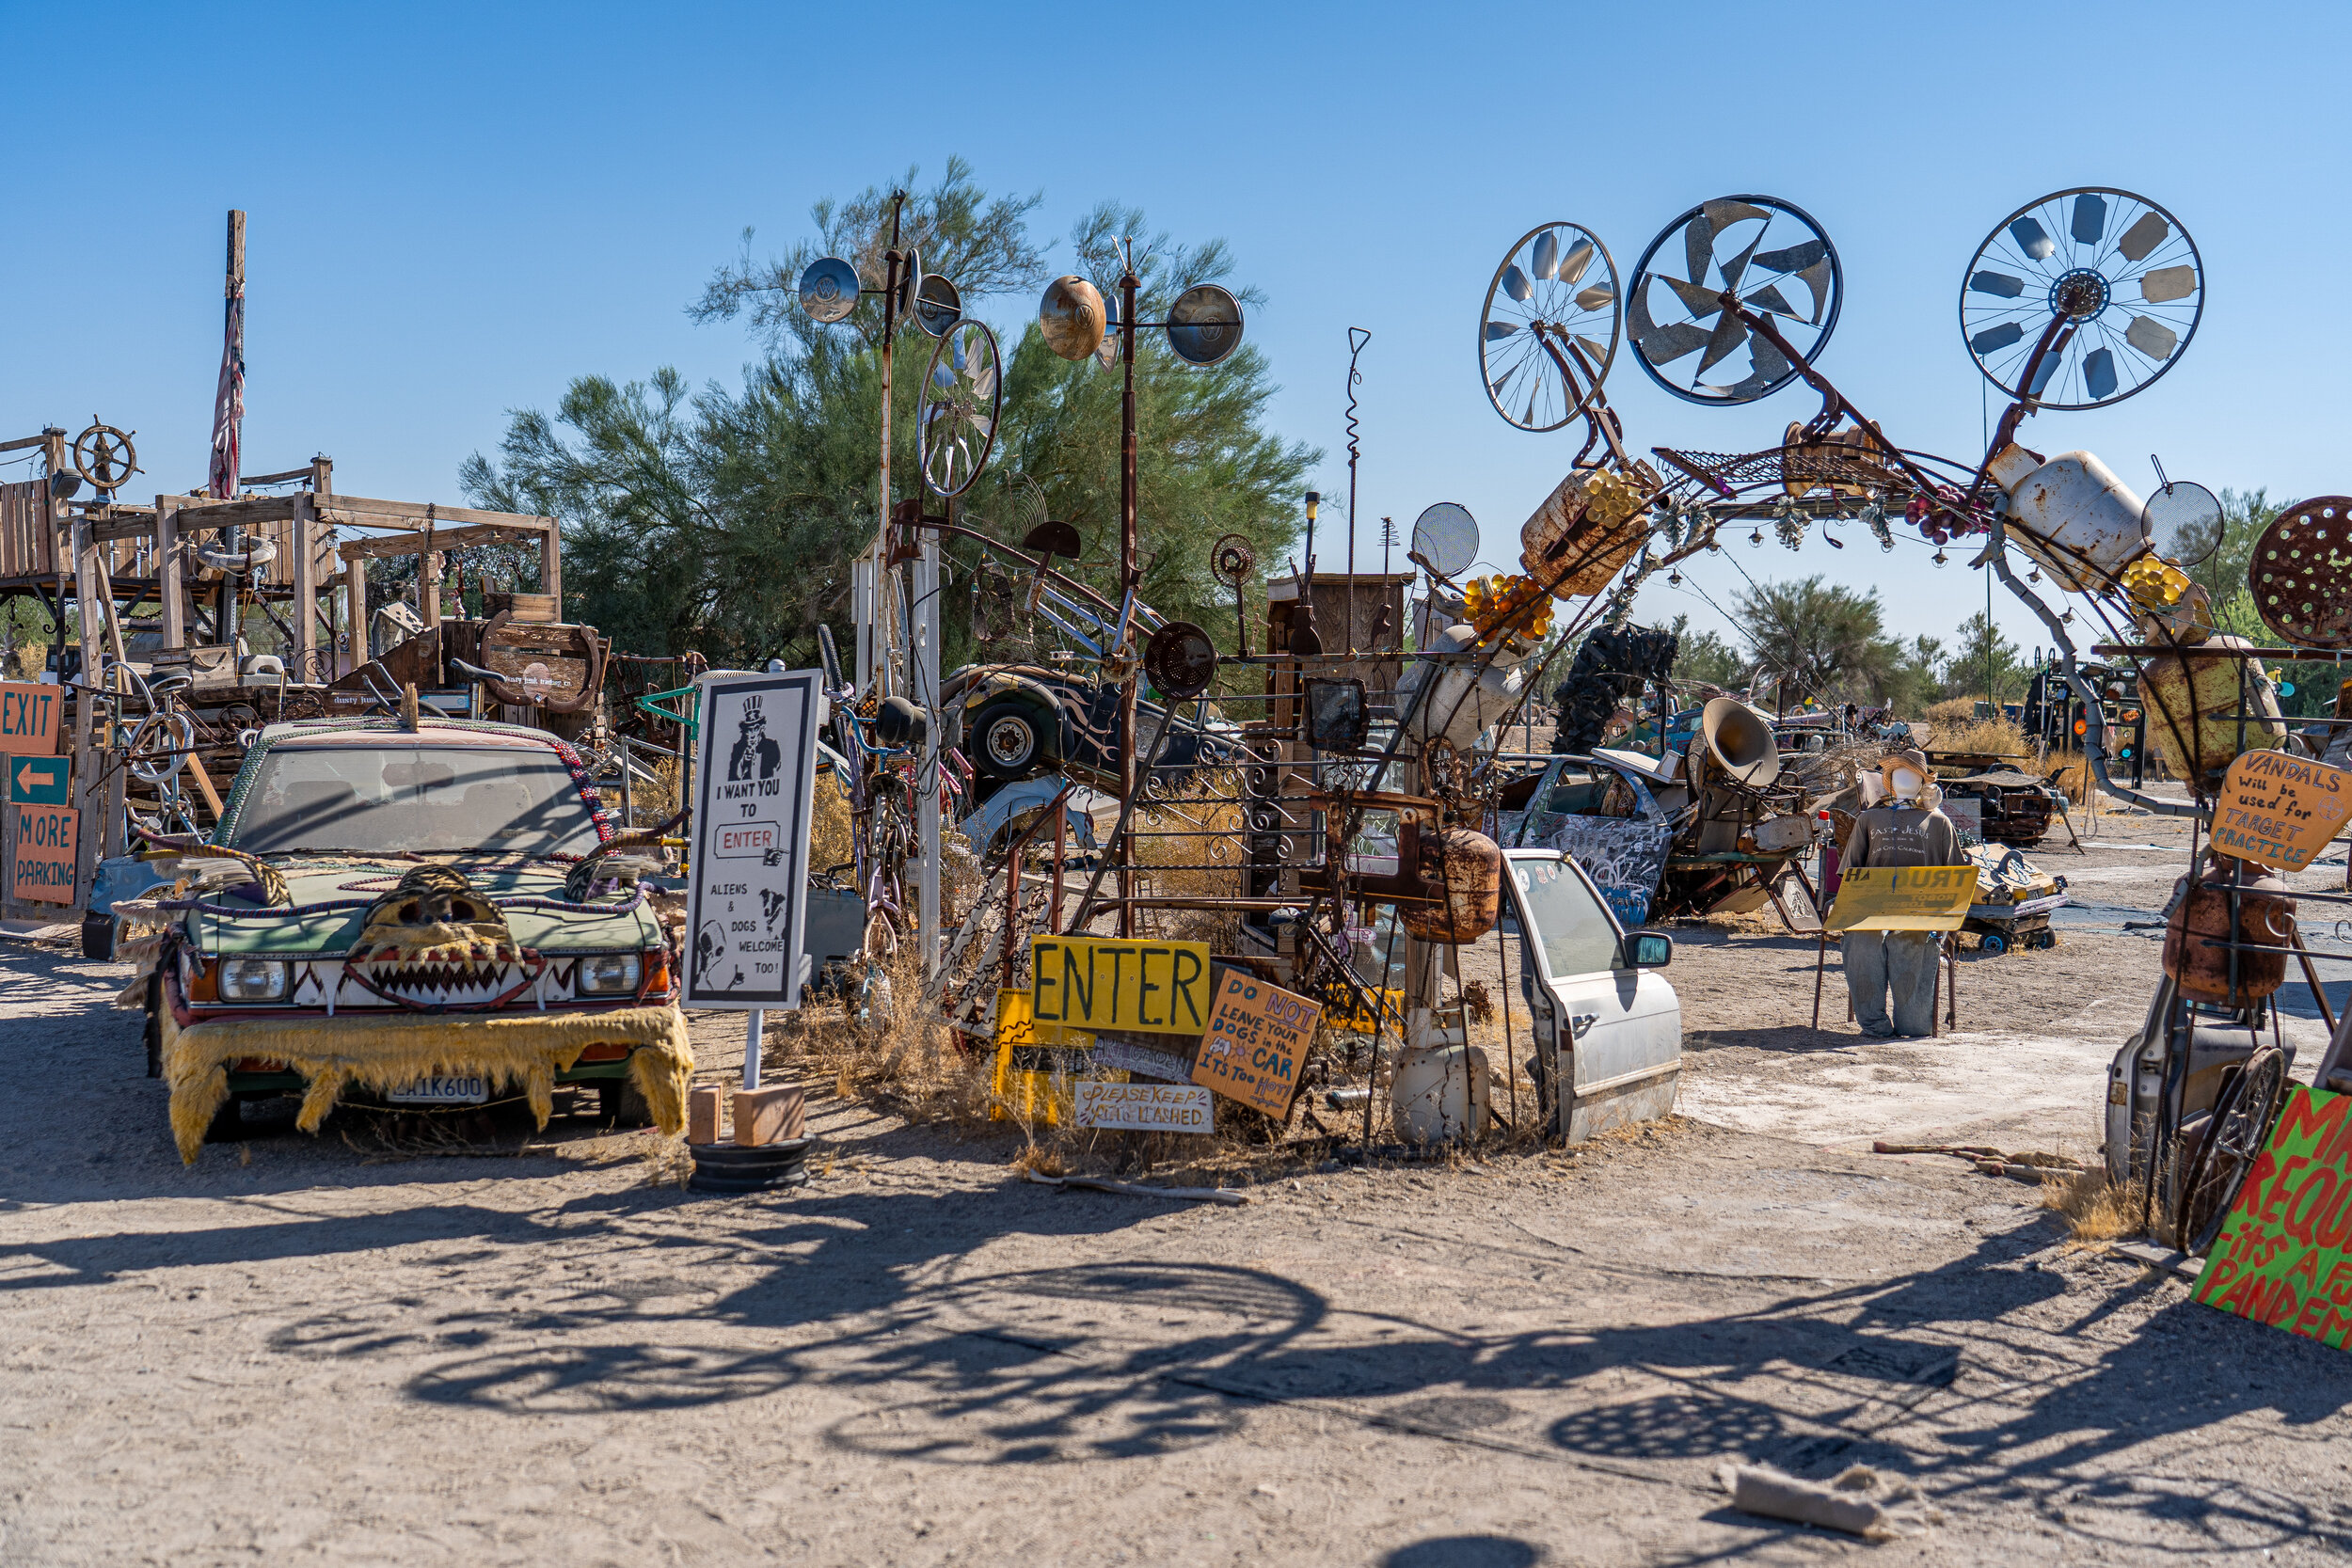   East Jesus  is at the very end of Slab City. My best explanation is that it’s a place where artists live and create random things with random things. Their humorous yet sophisticated website explains it in a little more detail:  The inhabitants pro